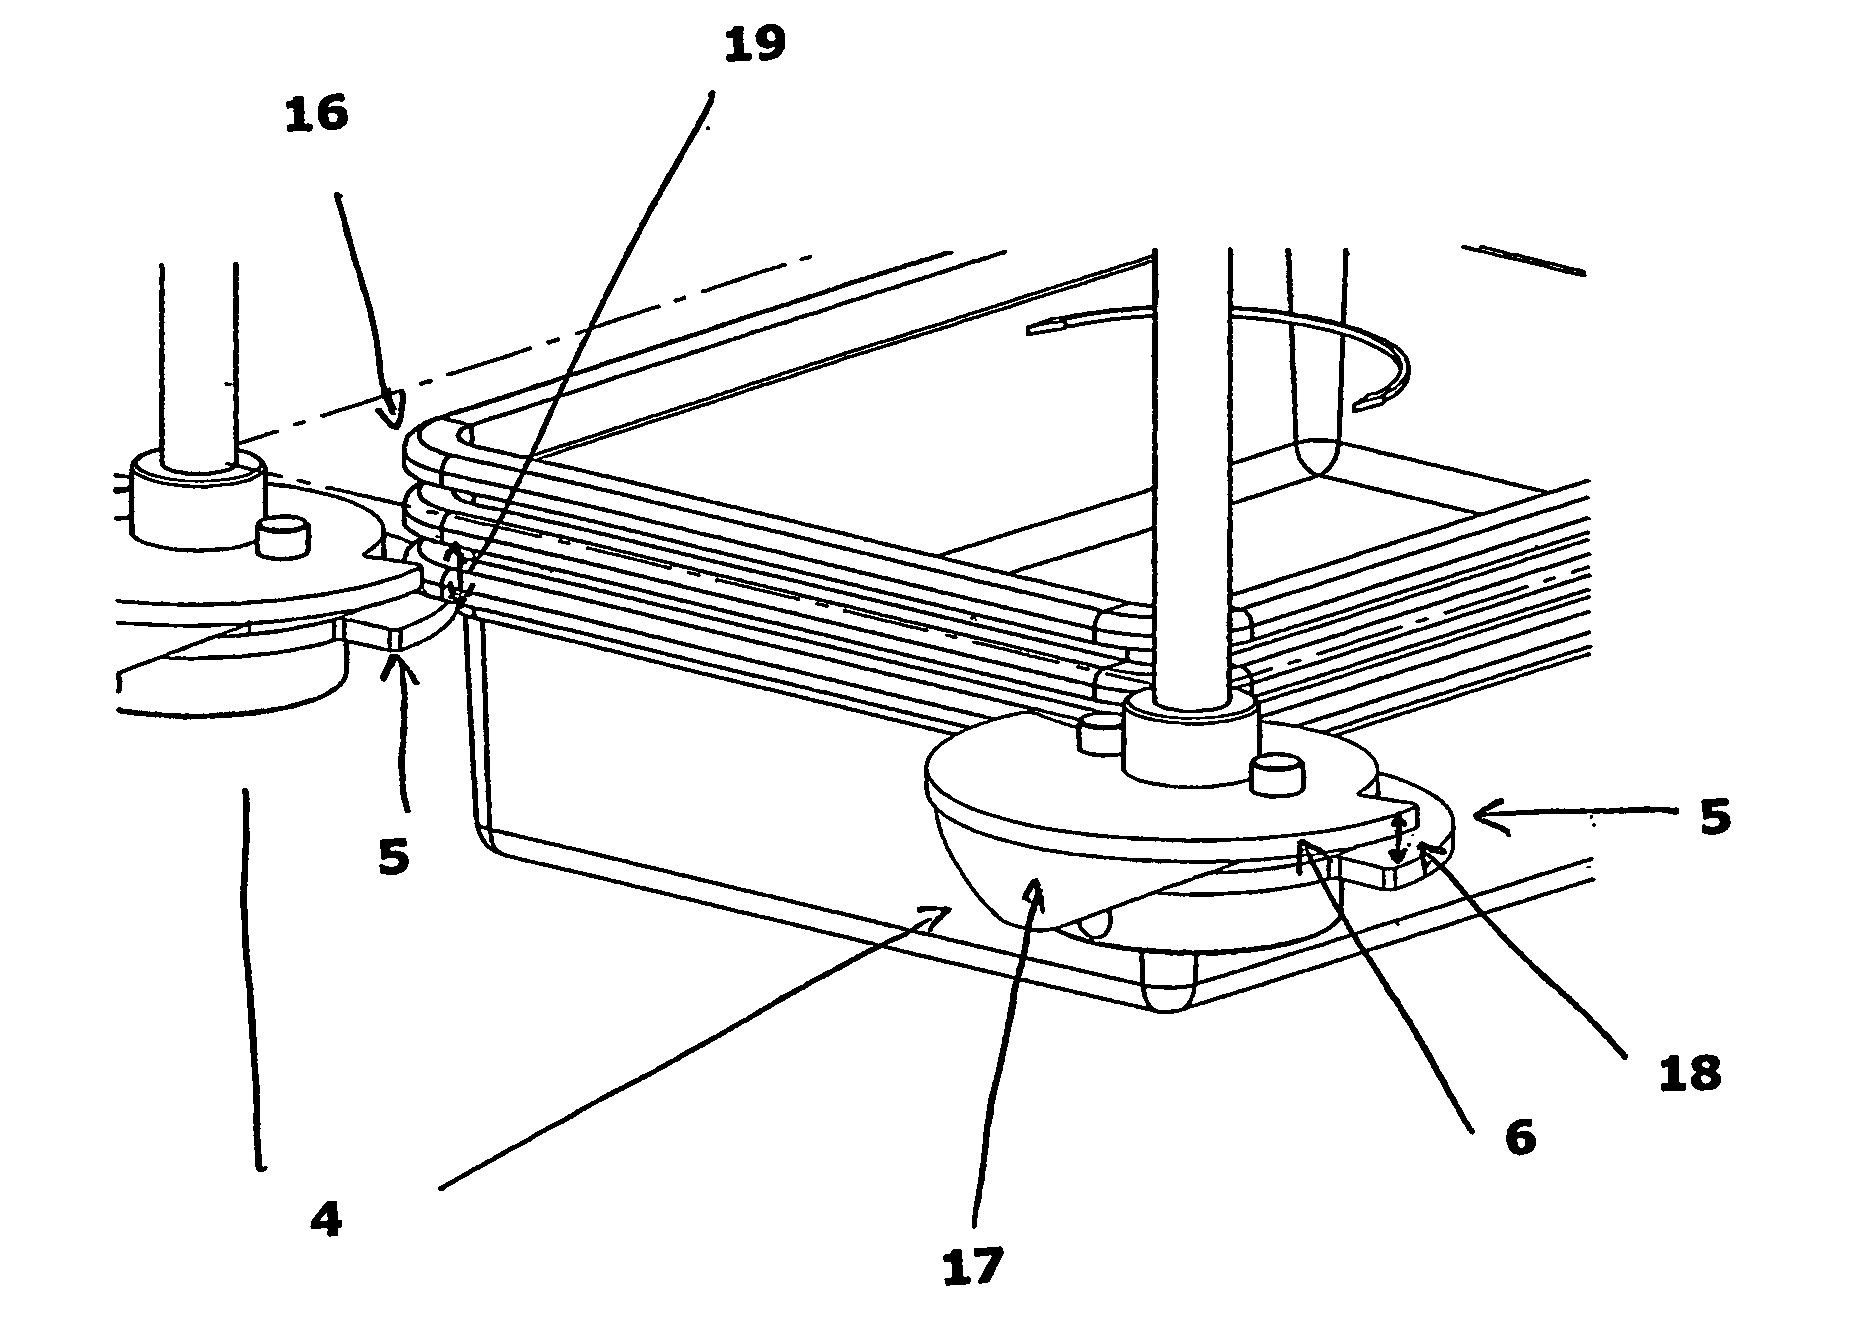 Apparatus for Dispensing of Stacked Objects, a Method for Dispensing Stacked Objects and a System Comprising an Apparatus for Dispensing